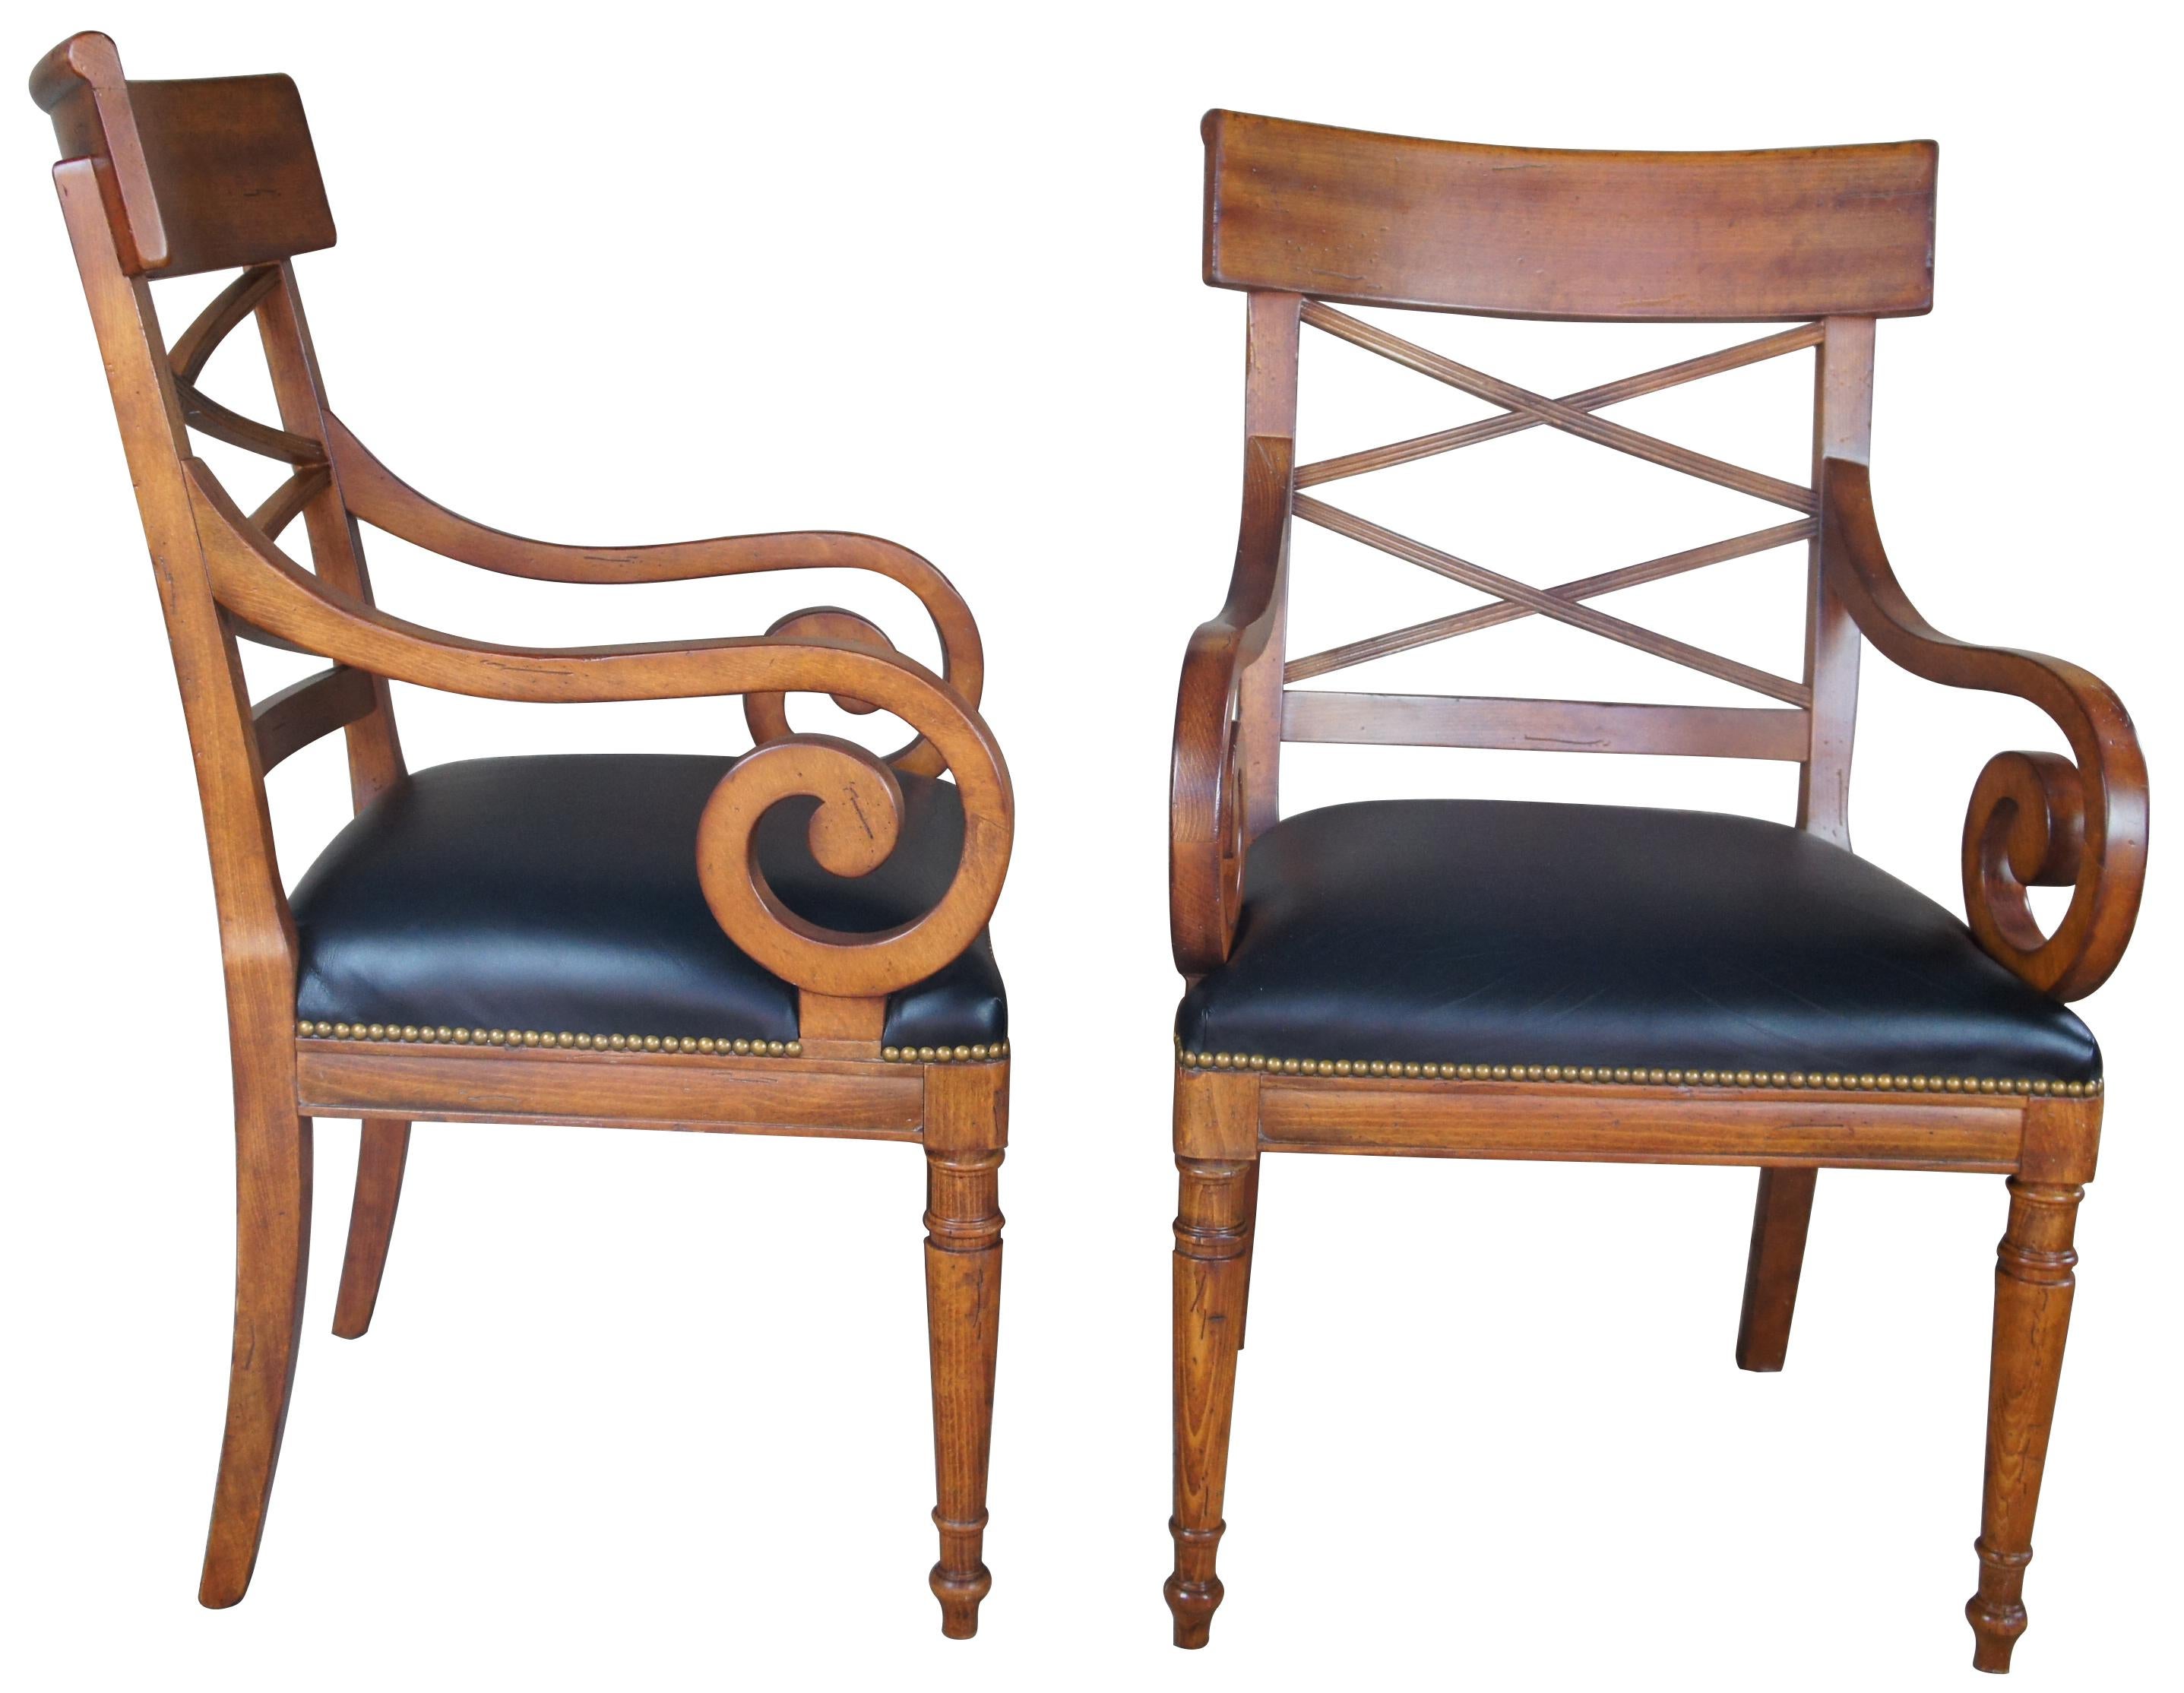 Baker Furniture milling road walnut Directoire chairs leather seat scroll arms

Milling Road for Baker (American, Grand Rapids, 1903-), late 20th century. Set of two Neoclassic walnut dining chairs, each having a curved crest scroll arm rail, an